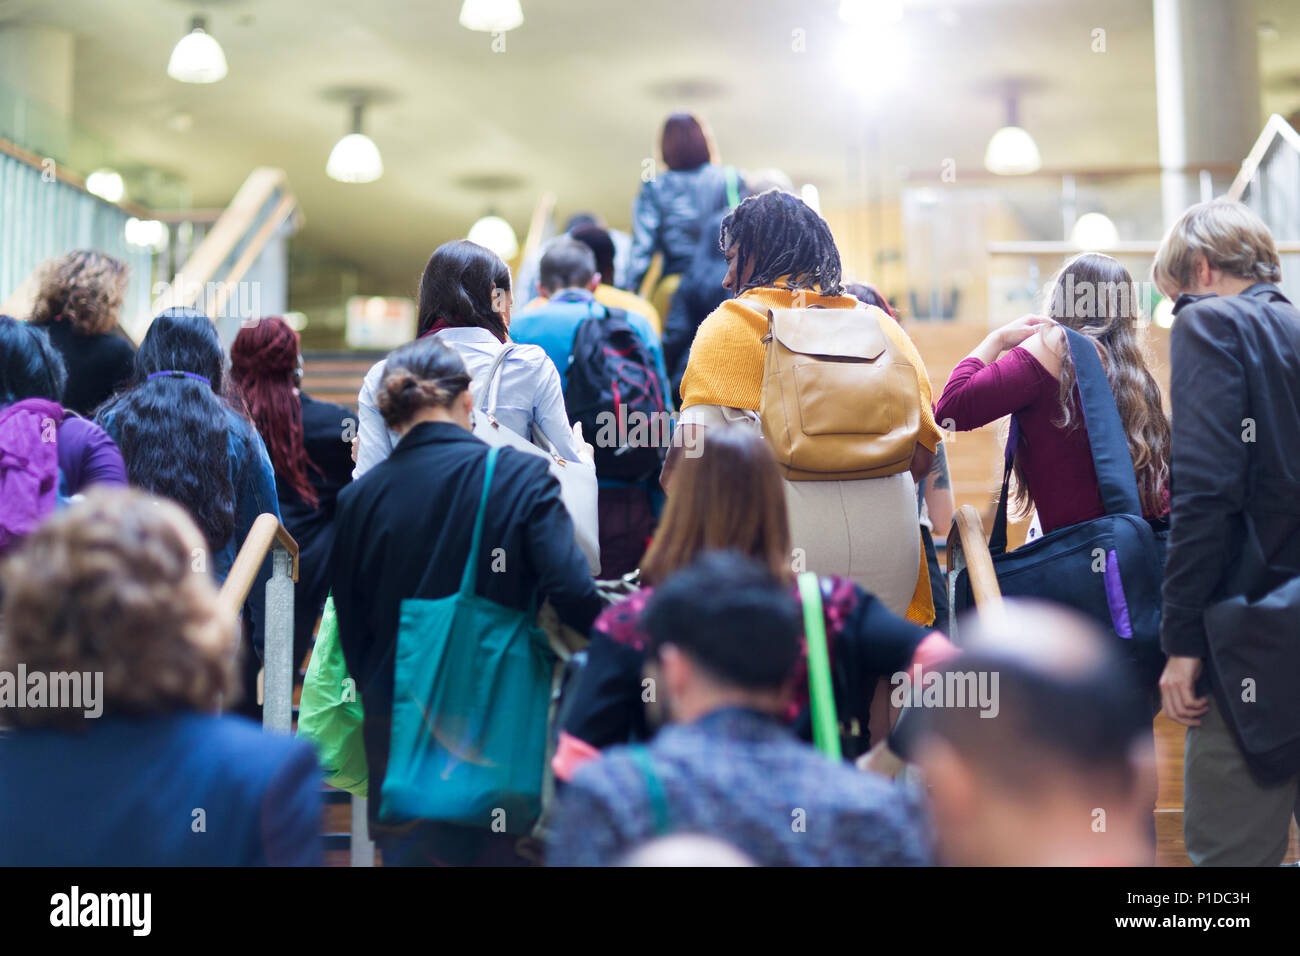 Crowd of people with backpacks and bags climbing stairs Stock Photo